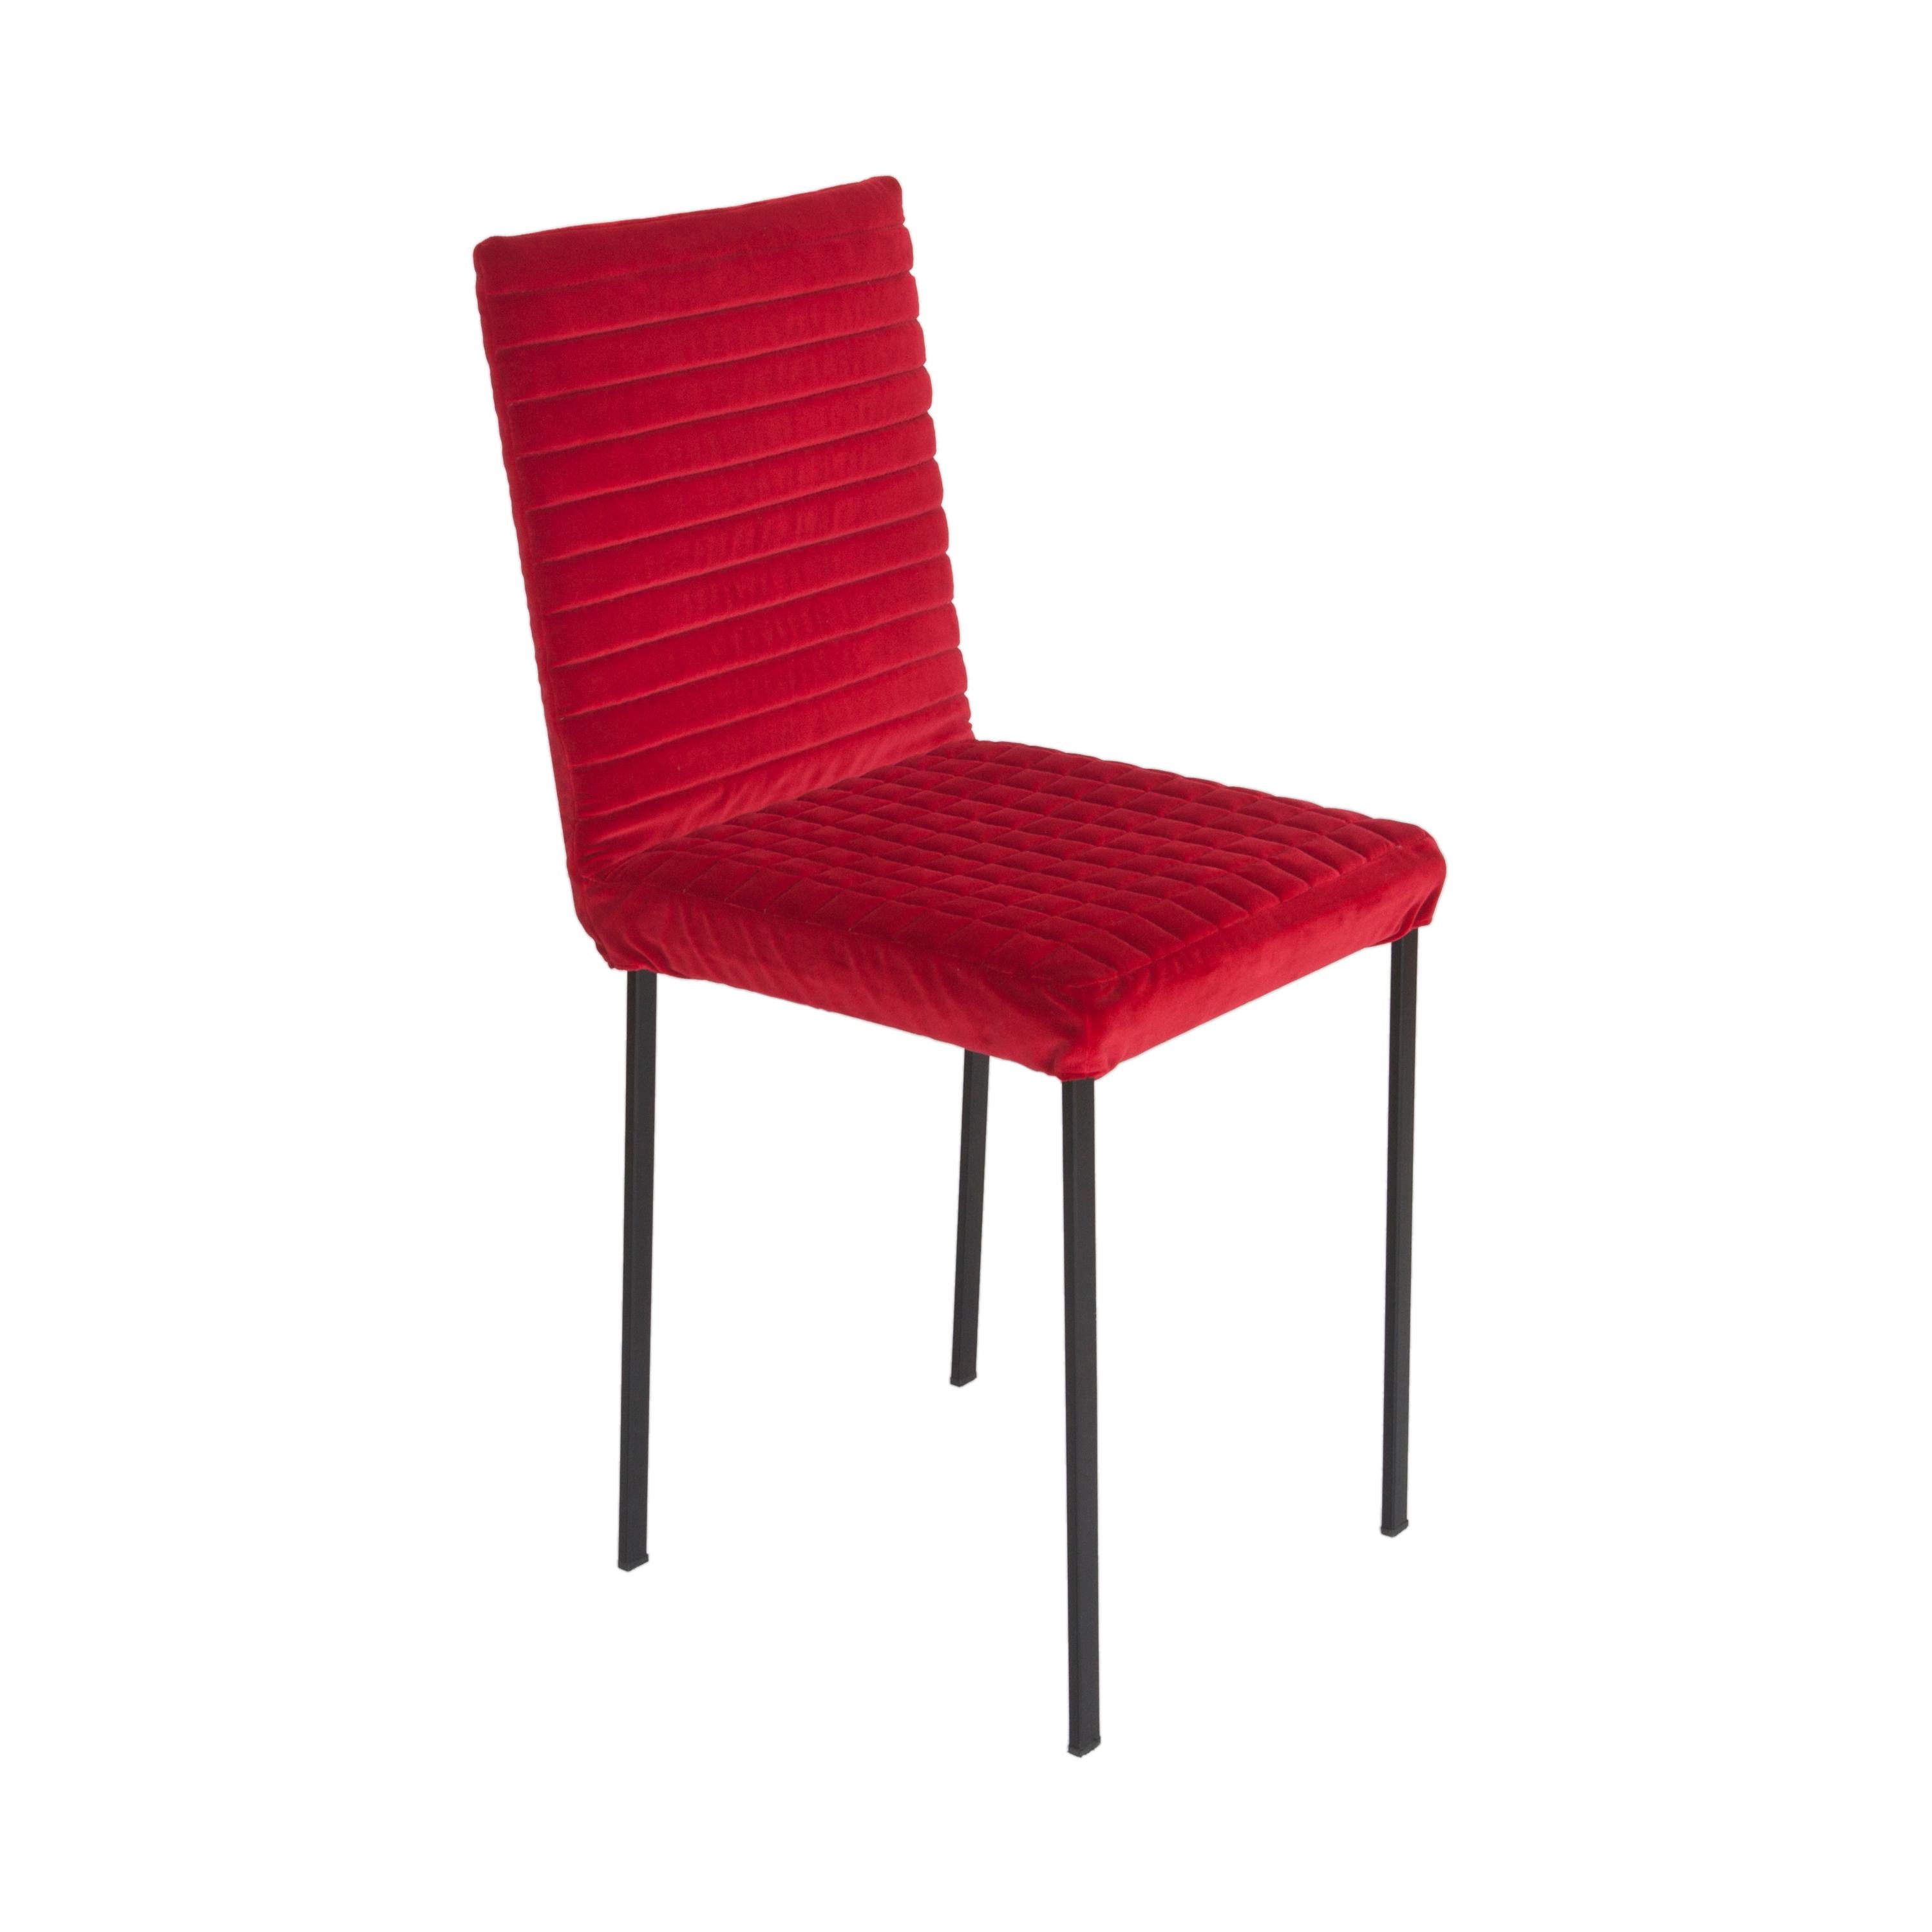 The ‘Tanit Soft’ chairs are available with an option that makes them unique objects in terms of richness and comfort: an upholstered and quilted cover of various colours that is put on the frame and fastened with a Velcro strap. 
The upholstered